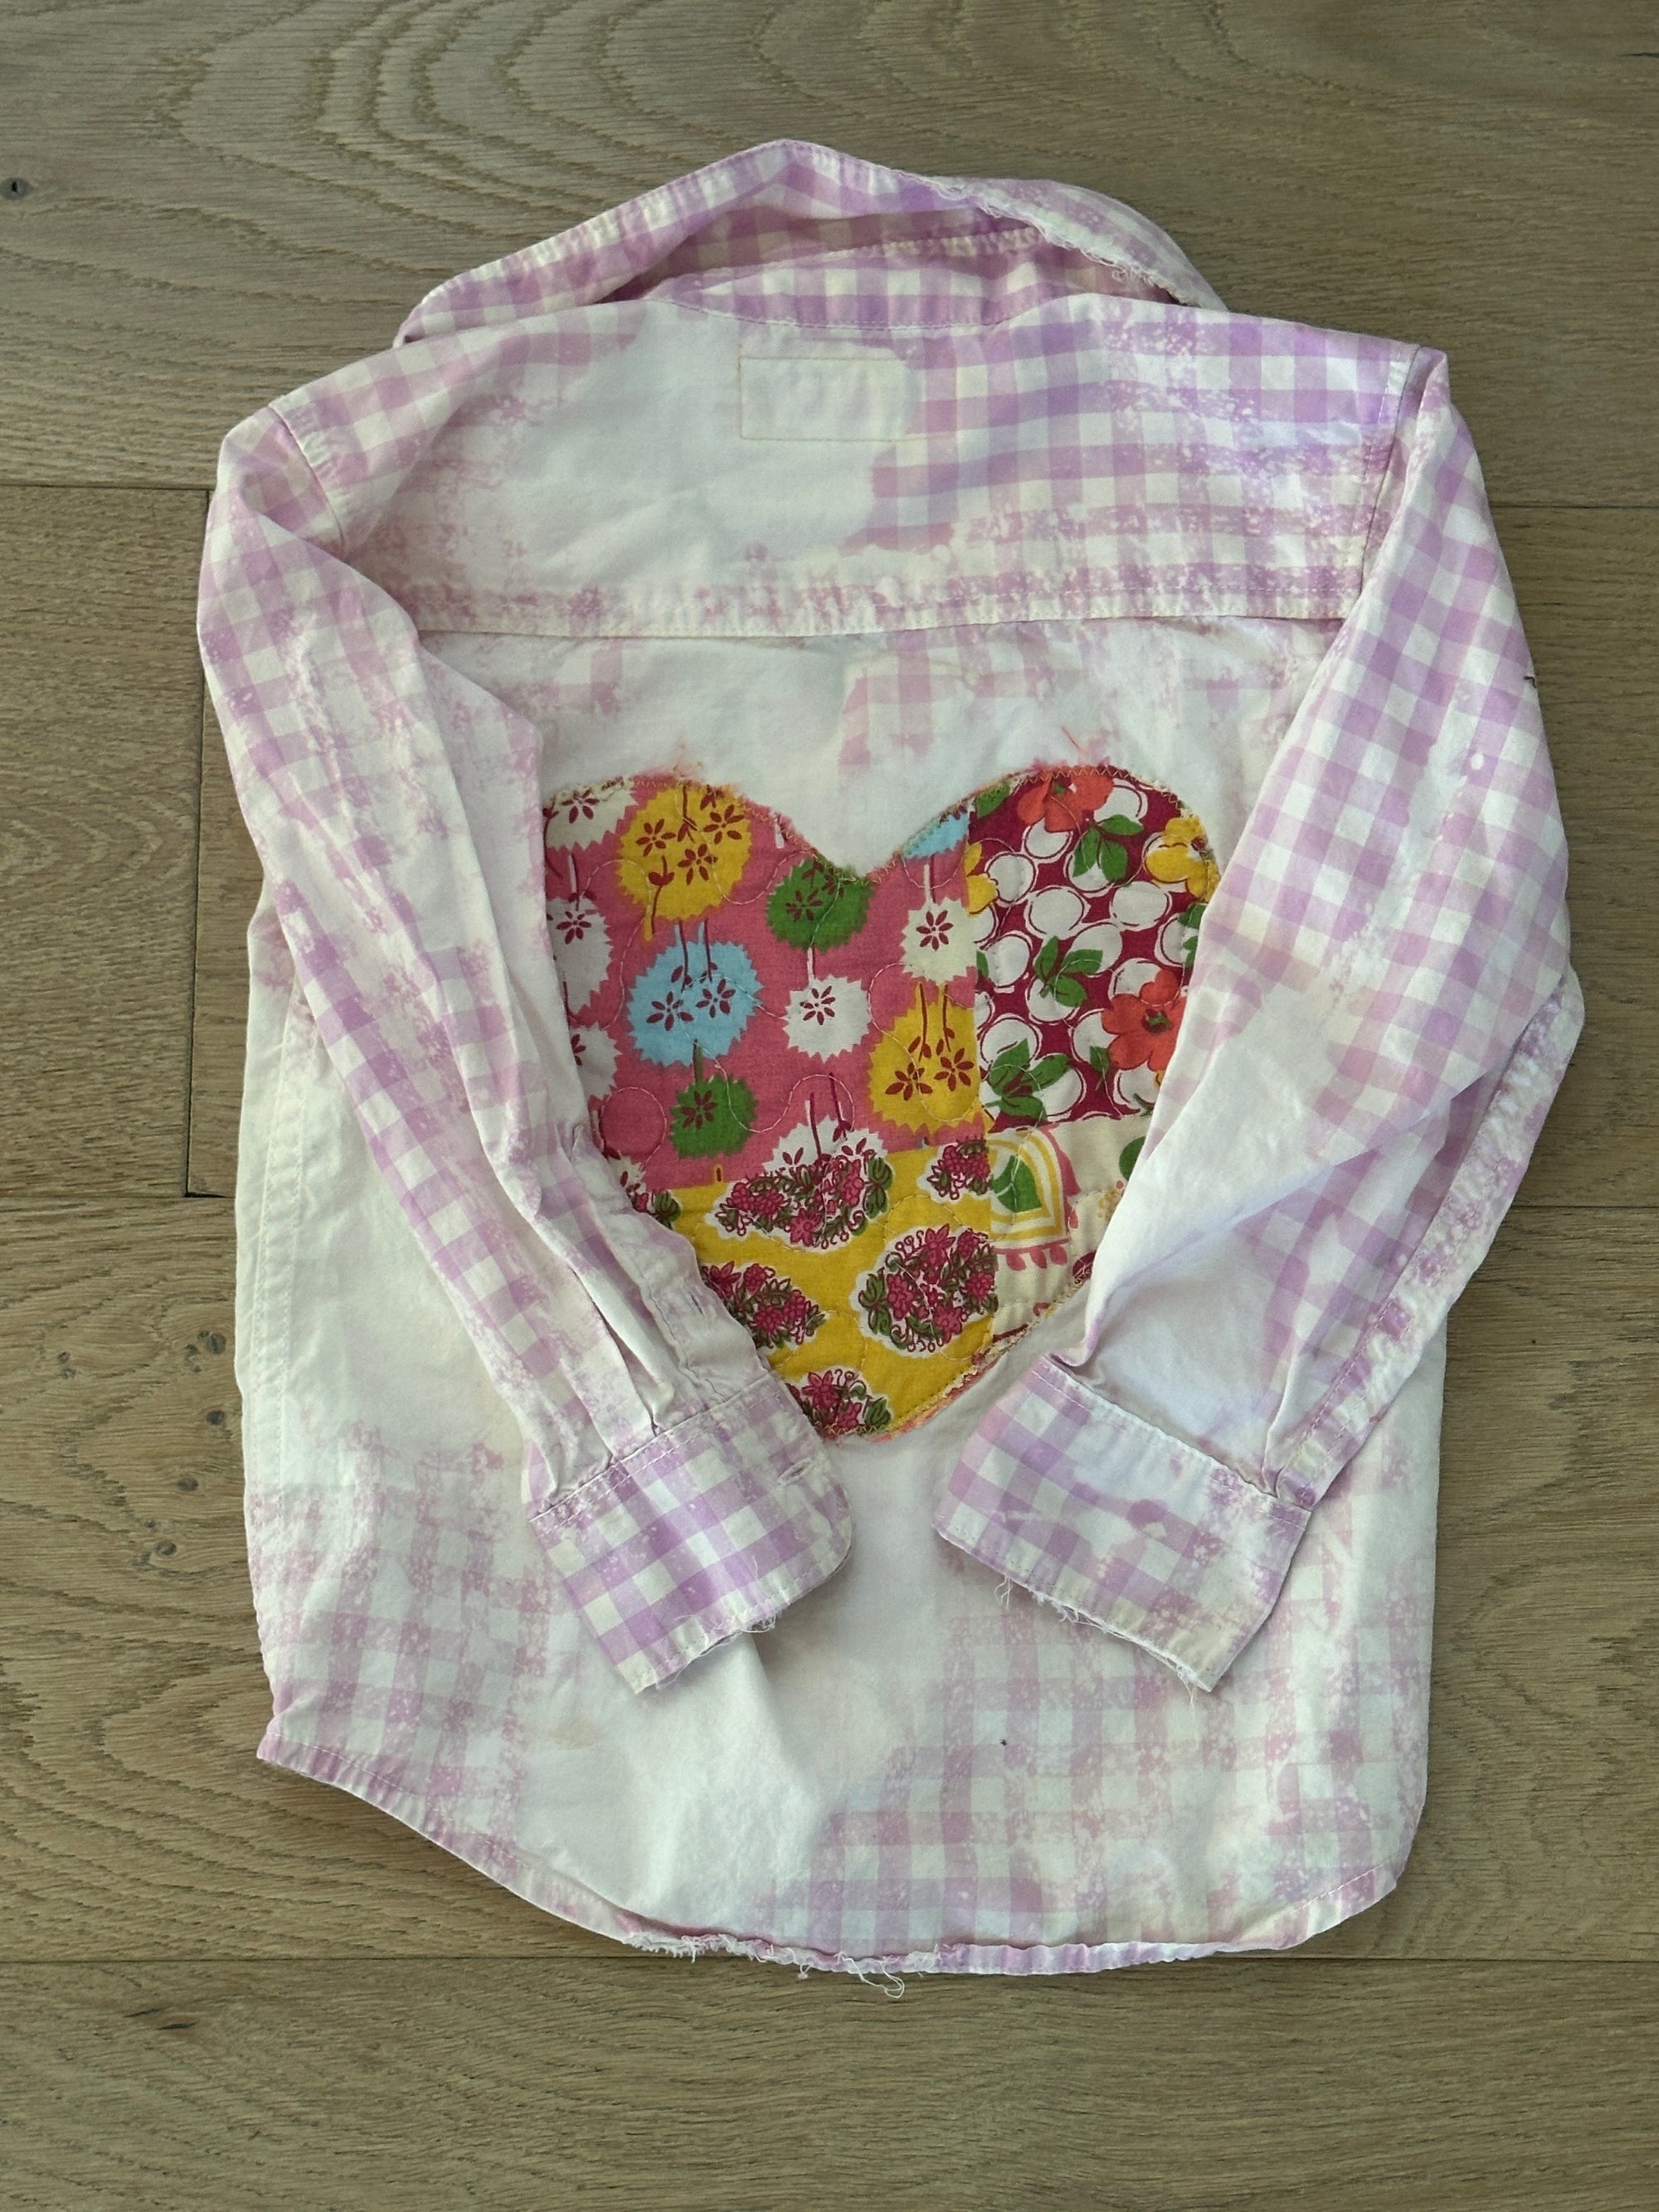 4T Quilted Heart Shirt